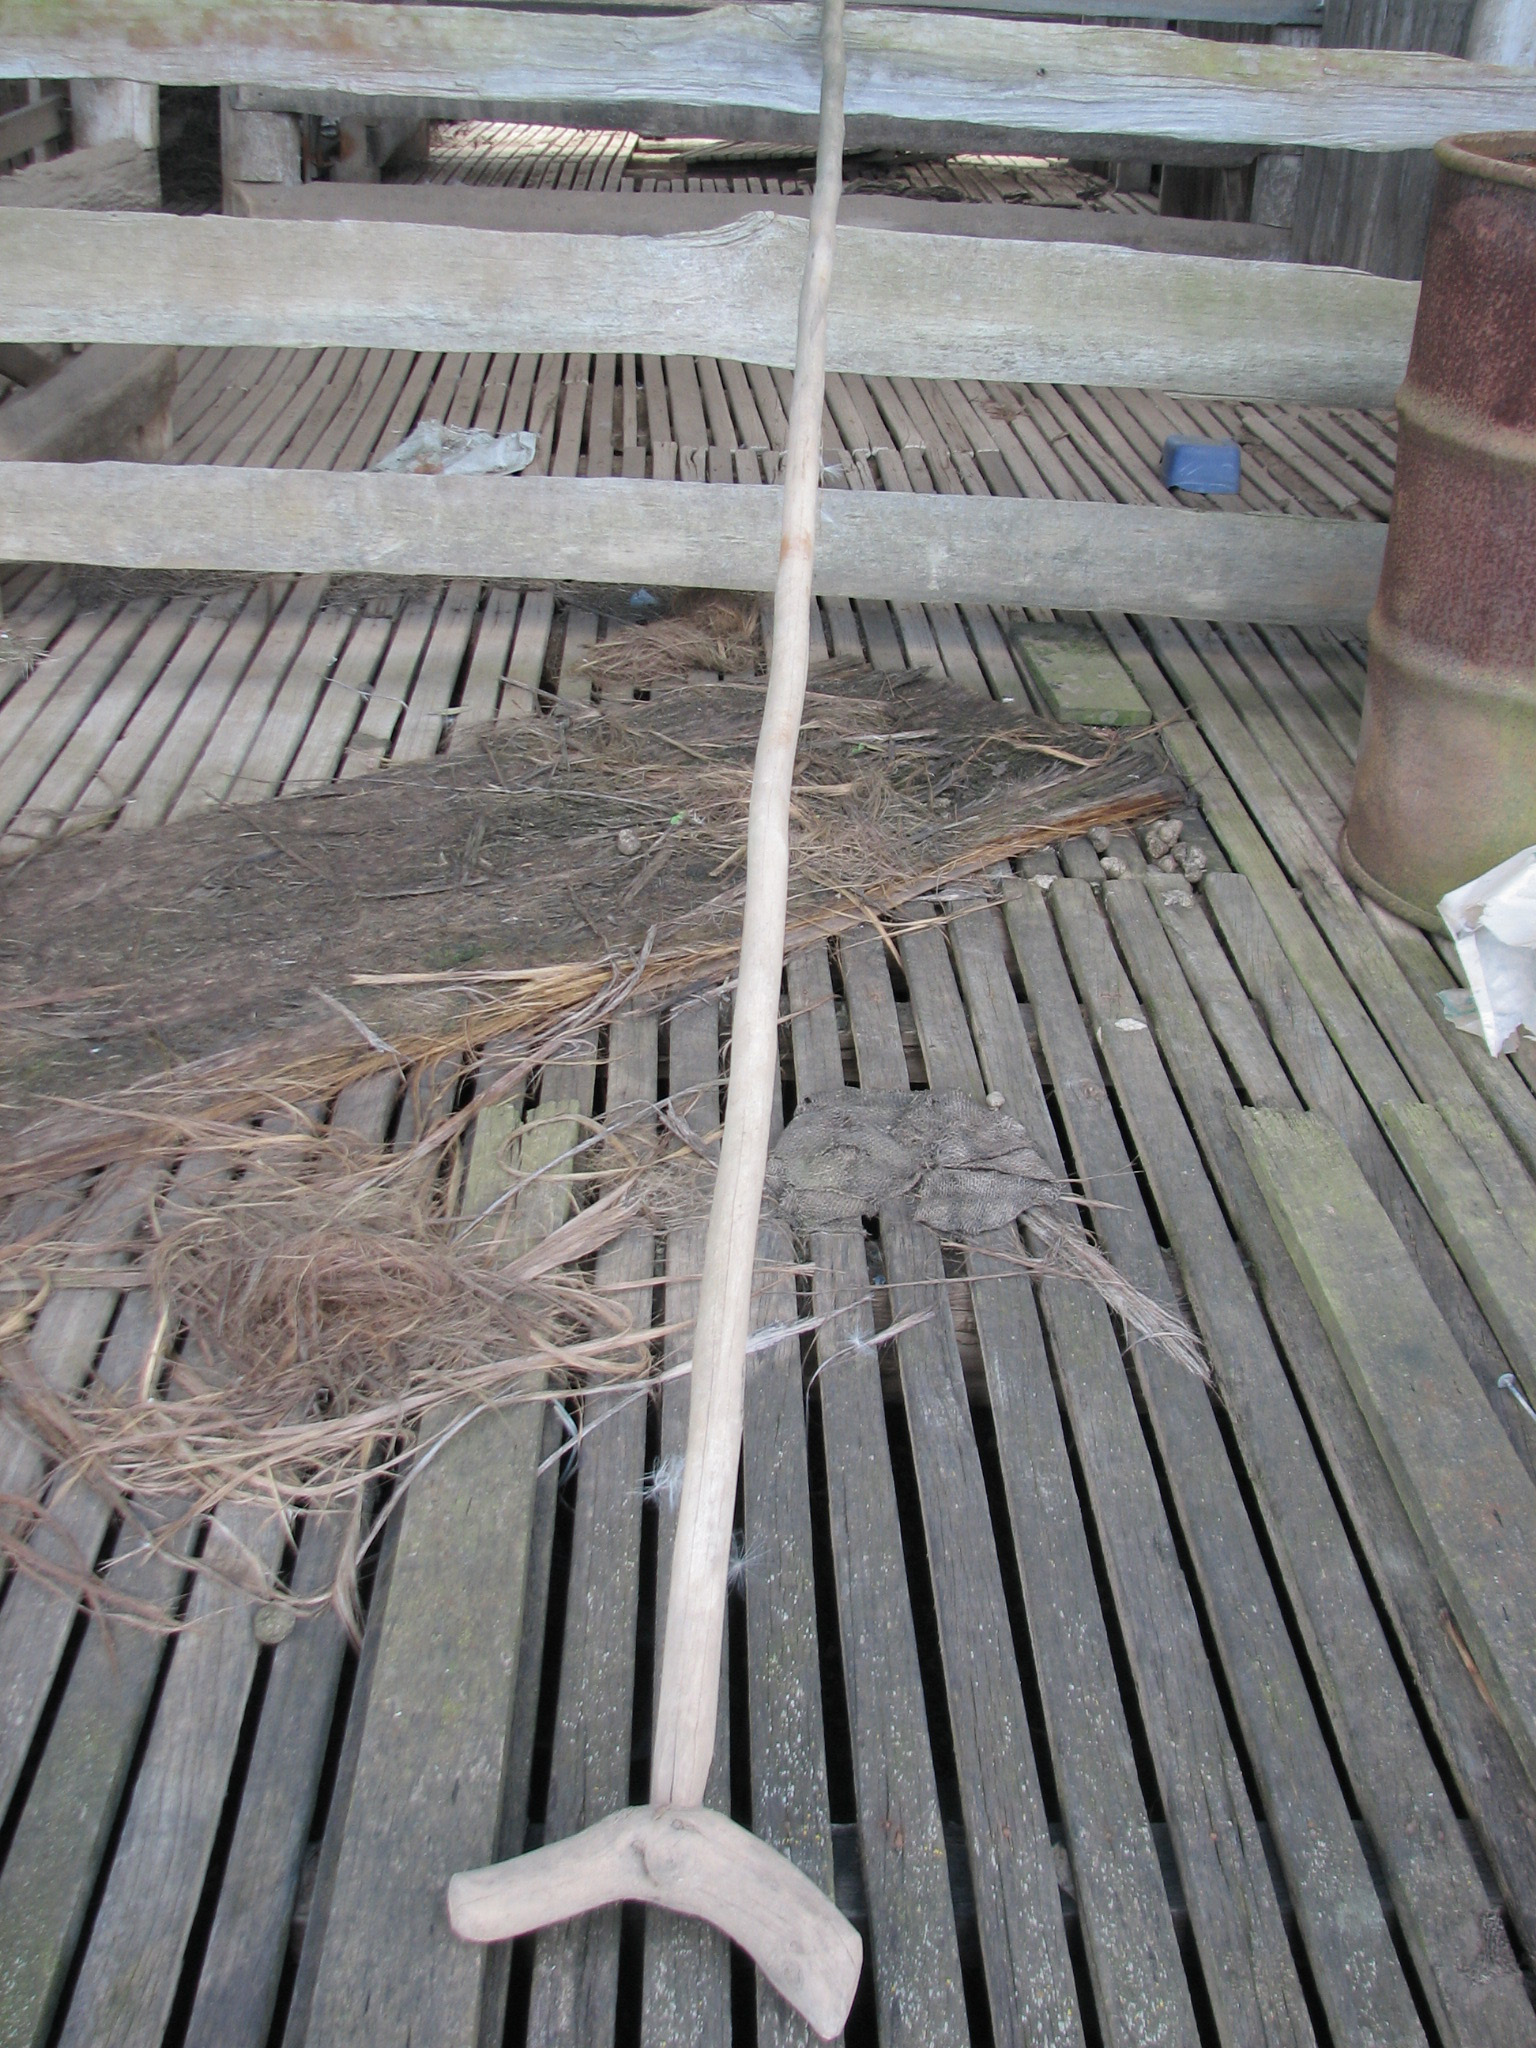 Sheep dipping stick used on 'Wanganderry', near Mittagong, NSW